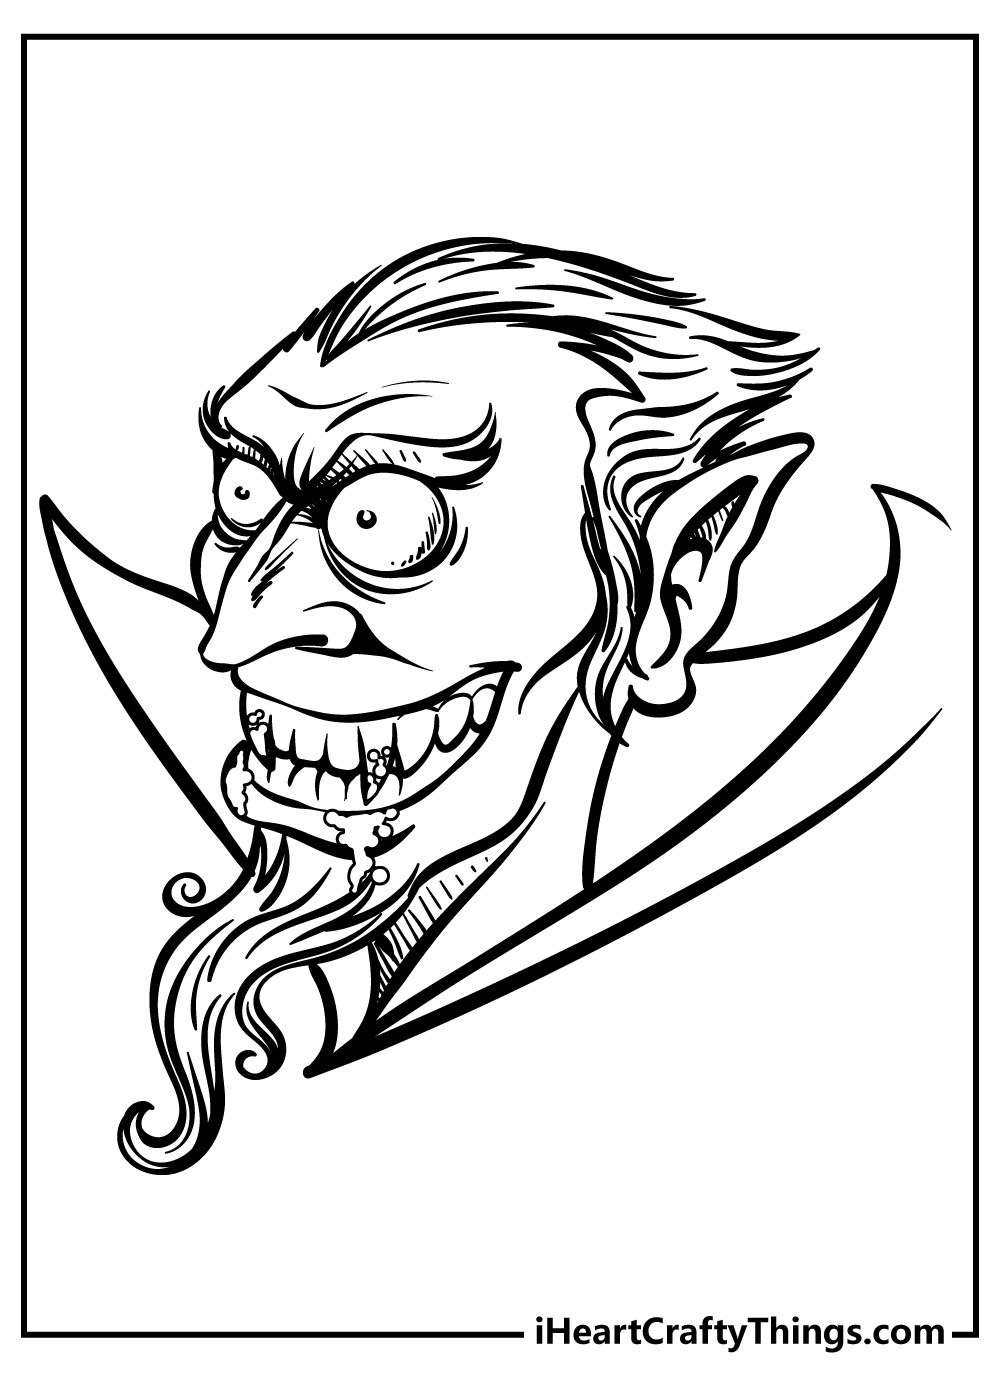 Count Dracula Coloring Pages for preschoolers free printable